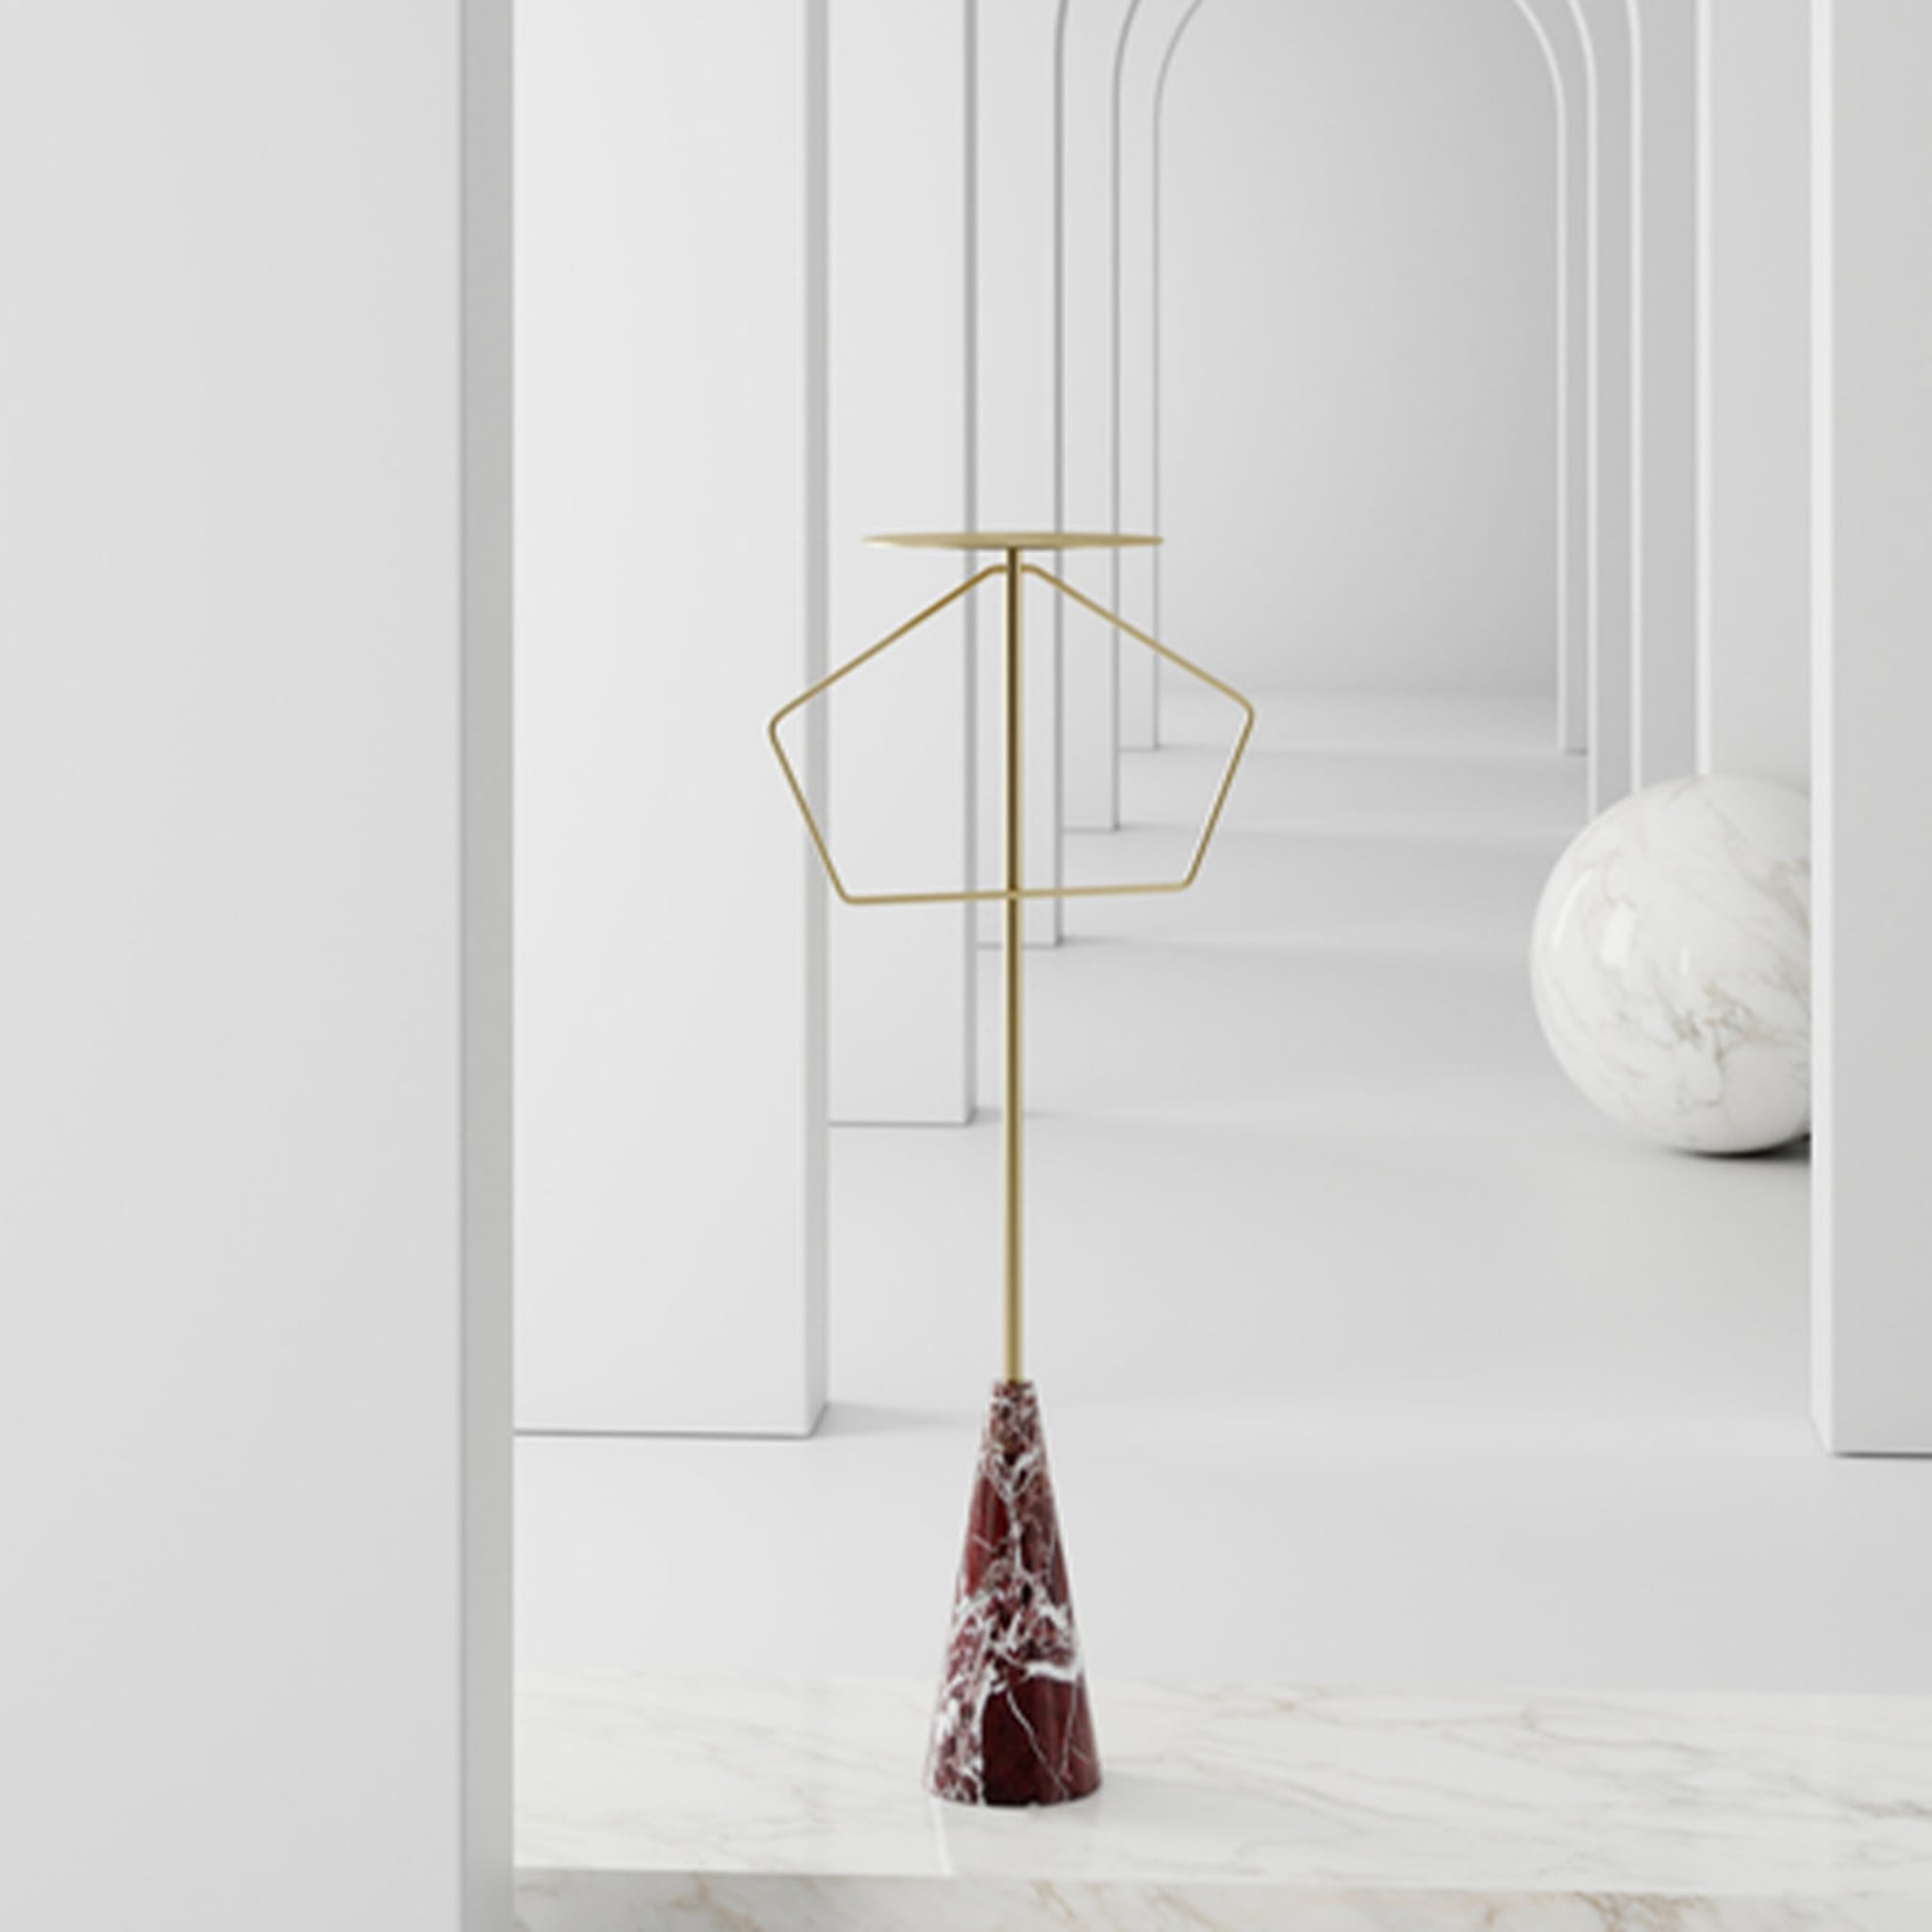 ED044 Red Stone and Brass Floor Lamp - Alternative view 4